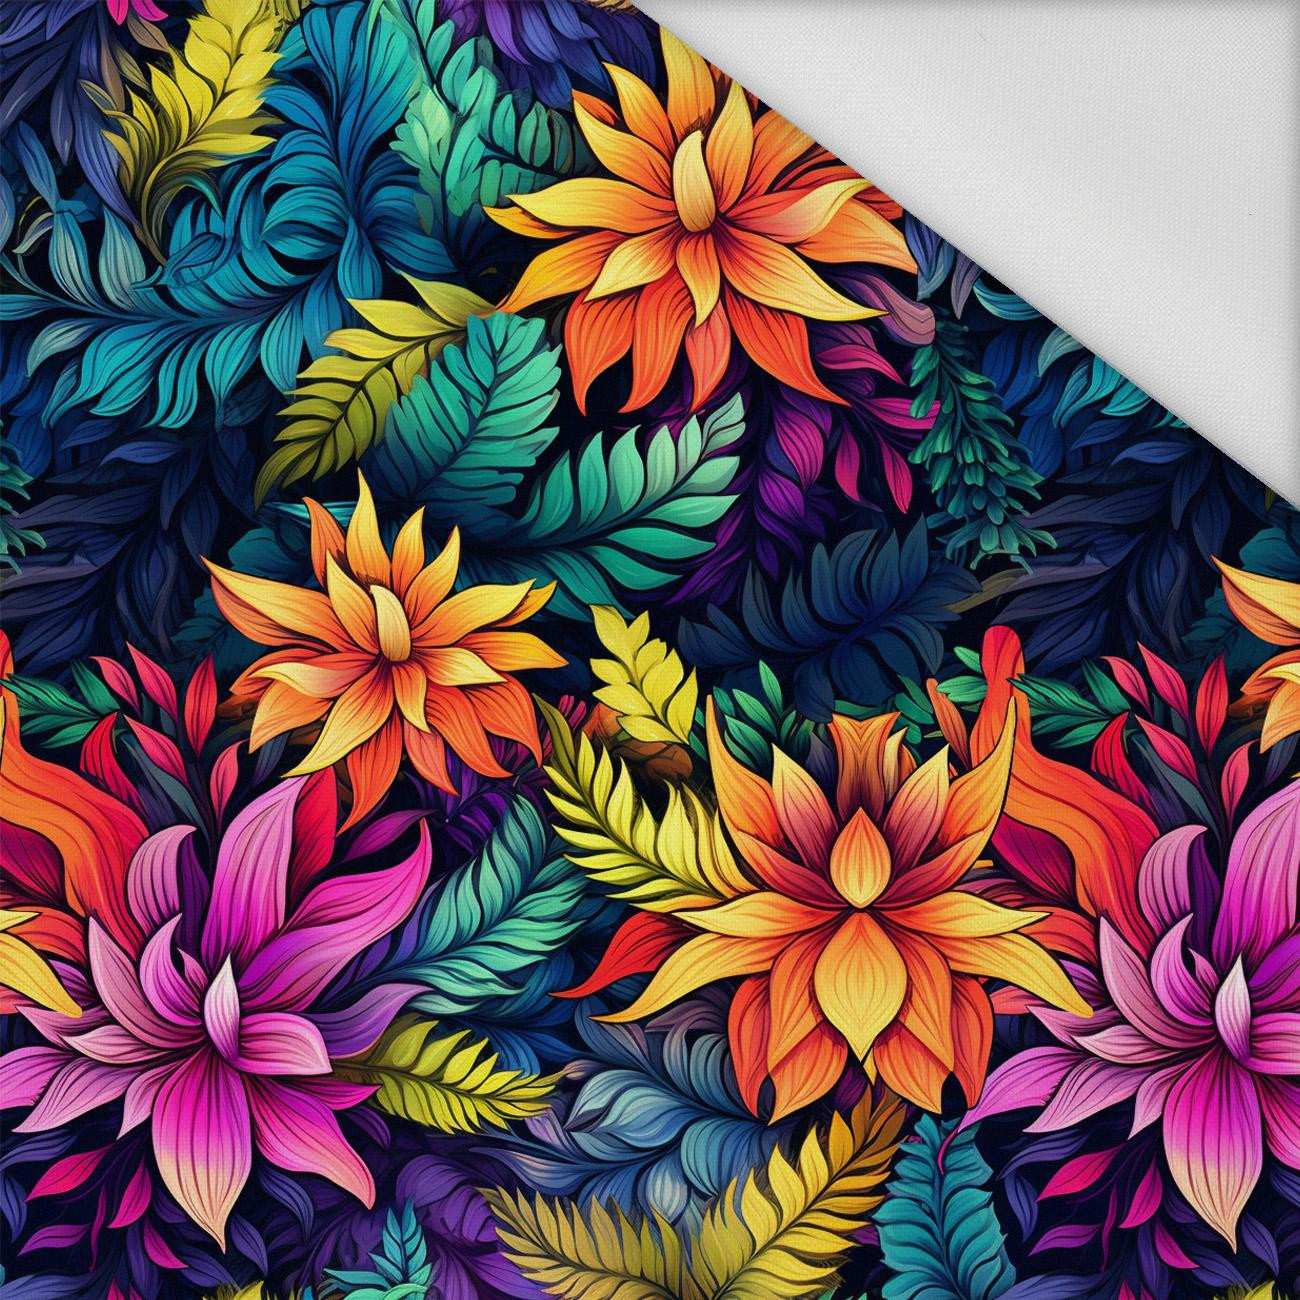 COLORFUL LEAVES pat. 6 - Waterproof woven fabric